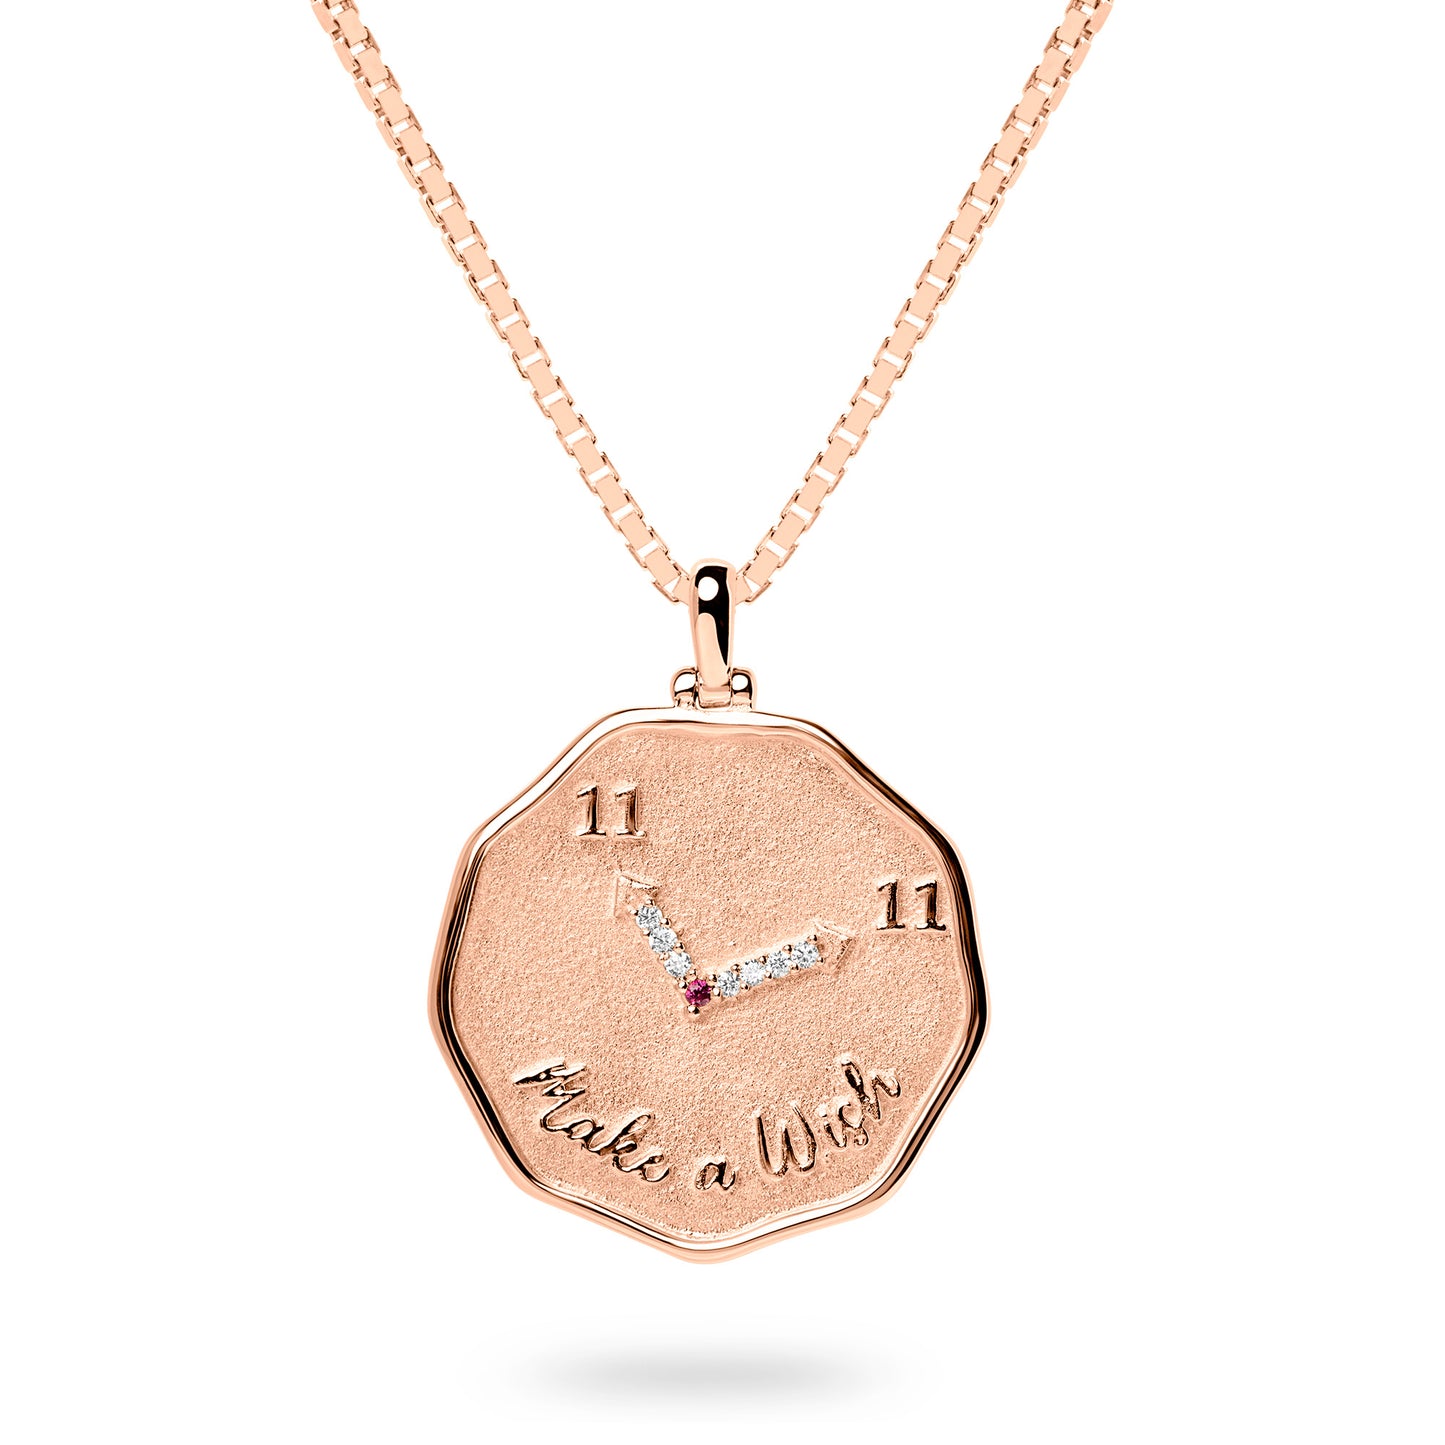 Diamond and Ruby “Make a wish at 11:11” Pendant Necklace (Gold)